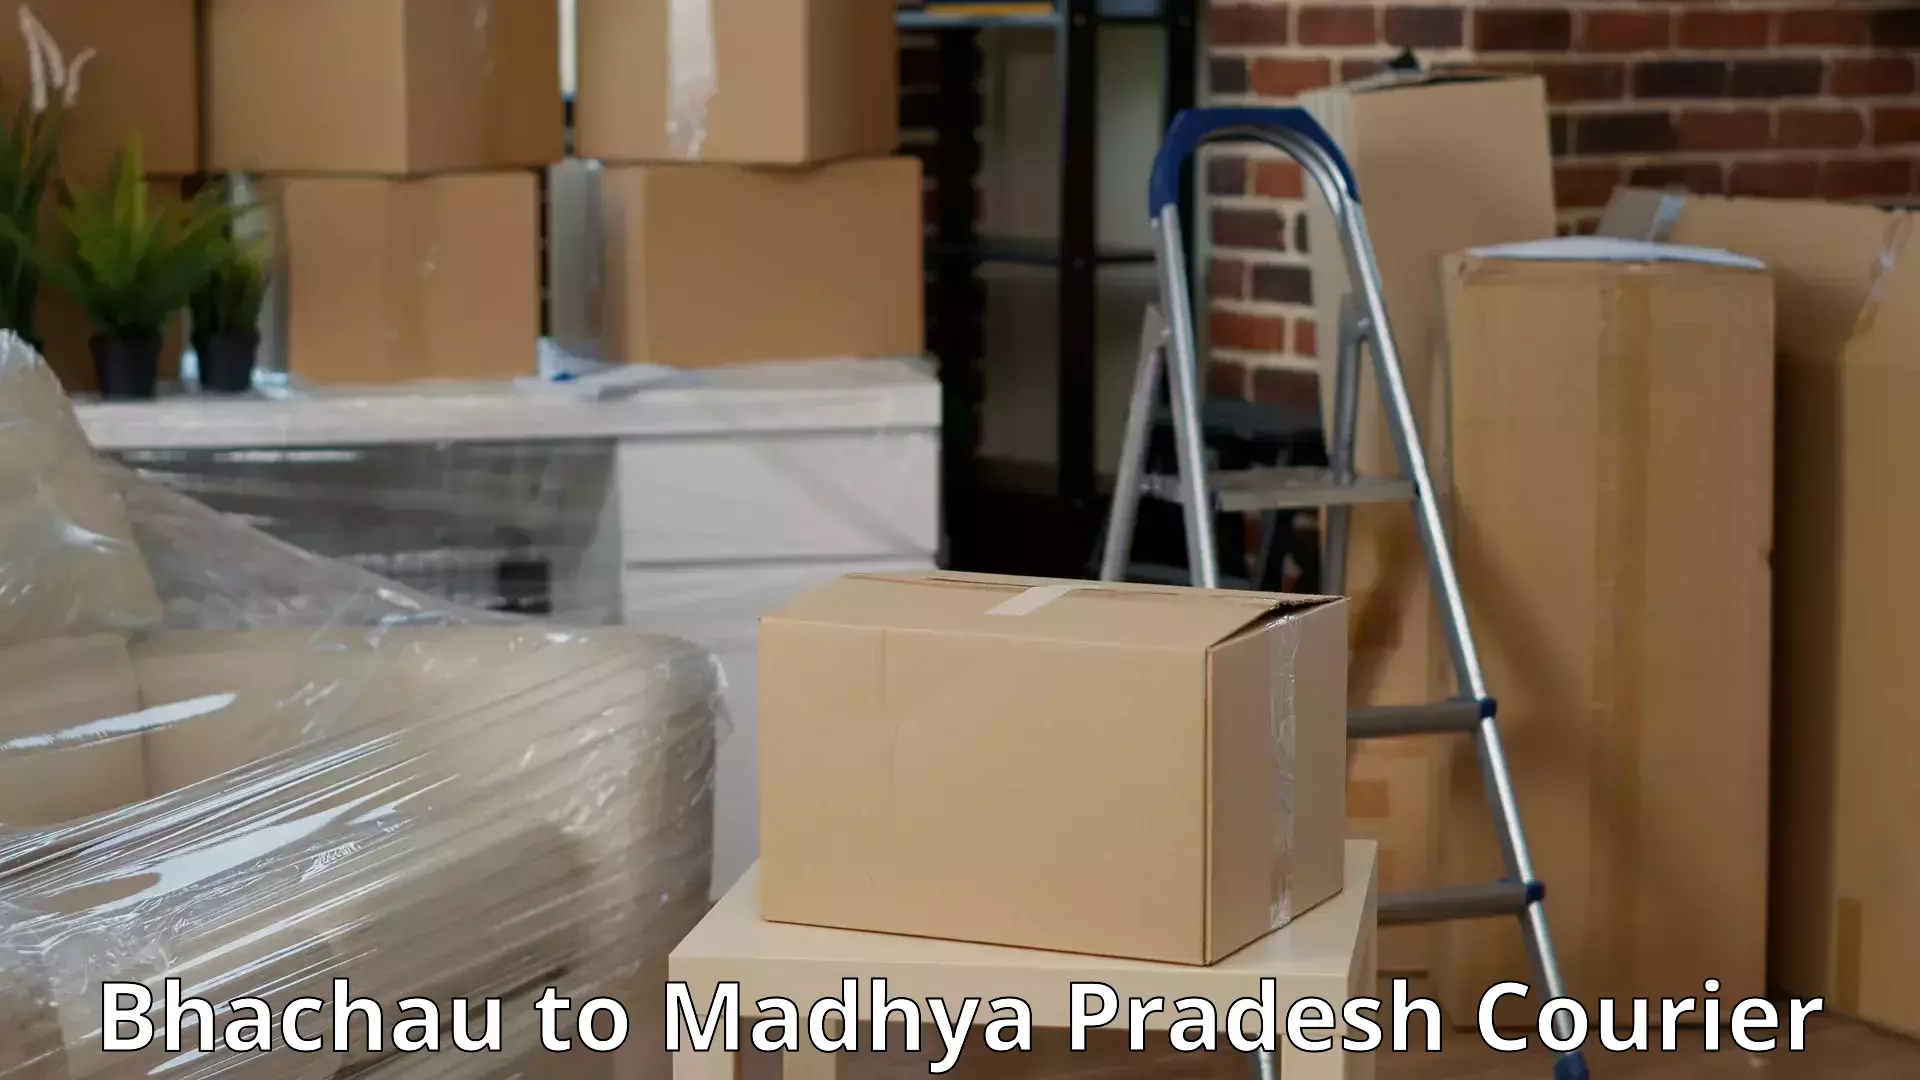 Home relocation experts Bhachau to Indore